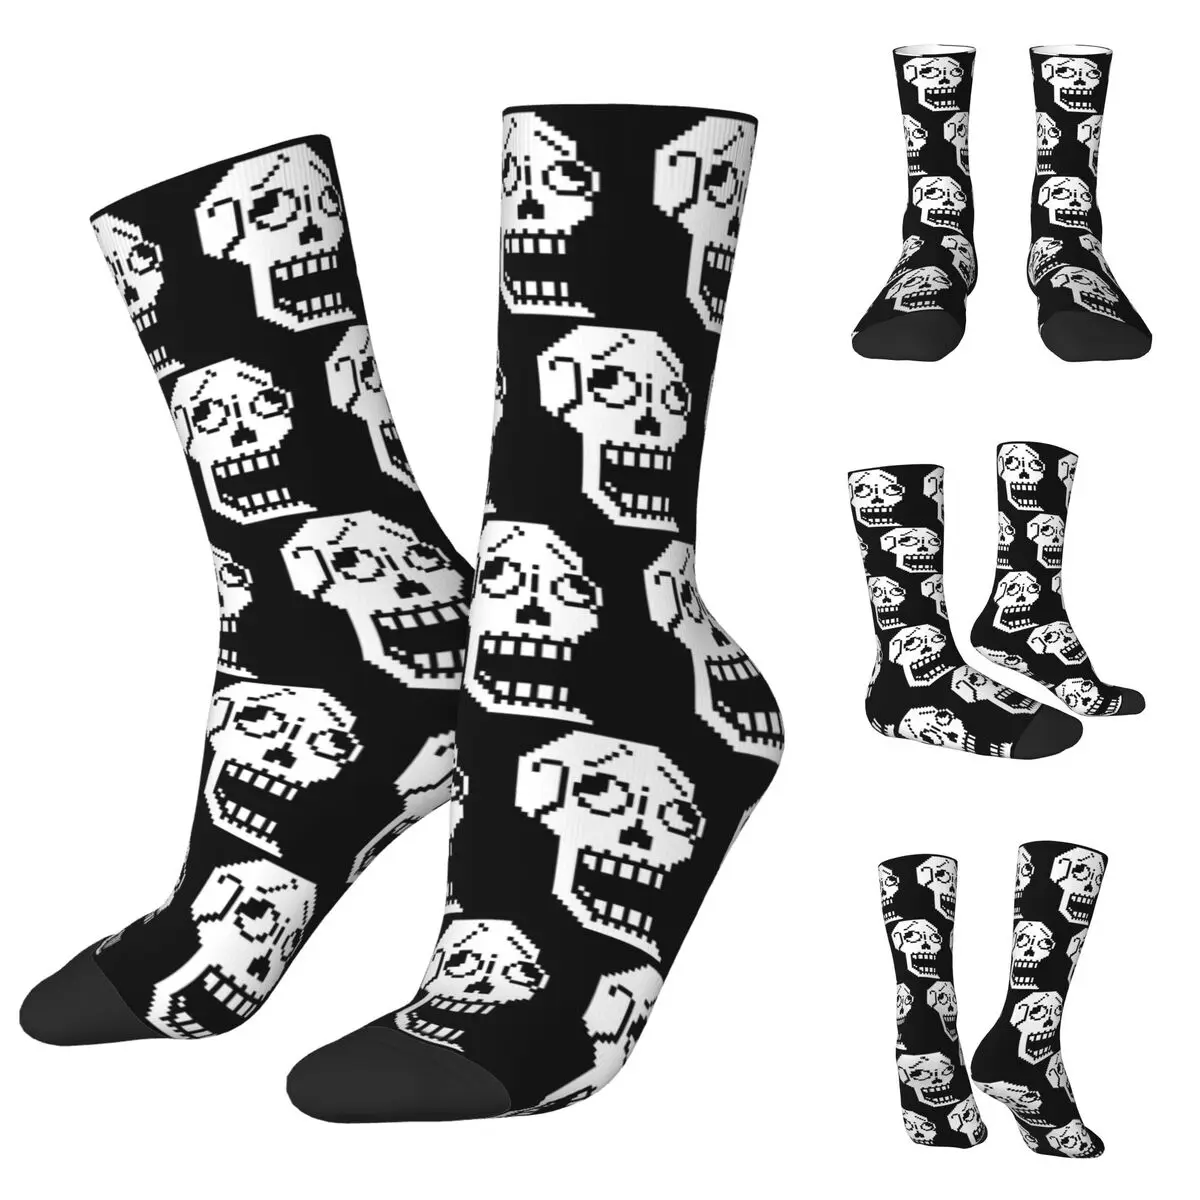 Sans And Papyrus Sprites Undertale Napstablook Men and Women printing Socks,Windproof Applicable throughout the year cool animals lions tigers gorillas men women socks windproof beautiful printing suitable for all seasons dressing gifts